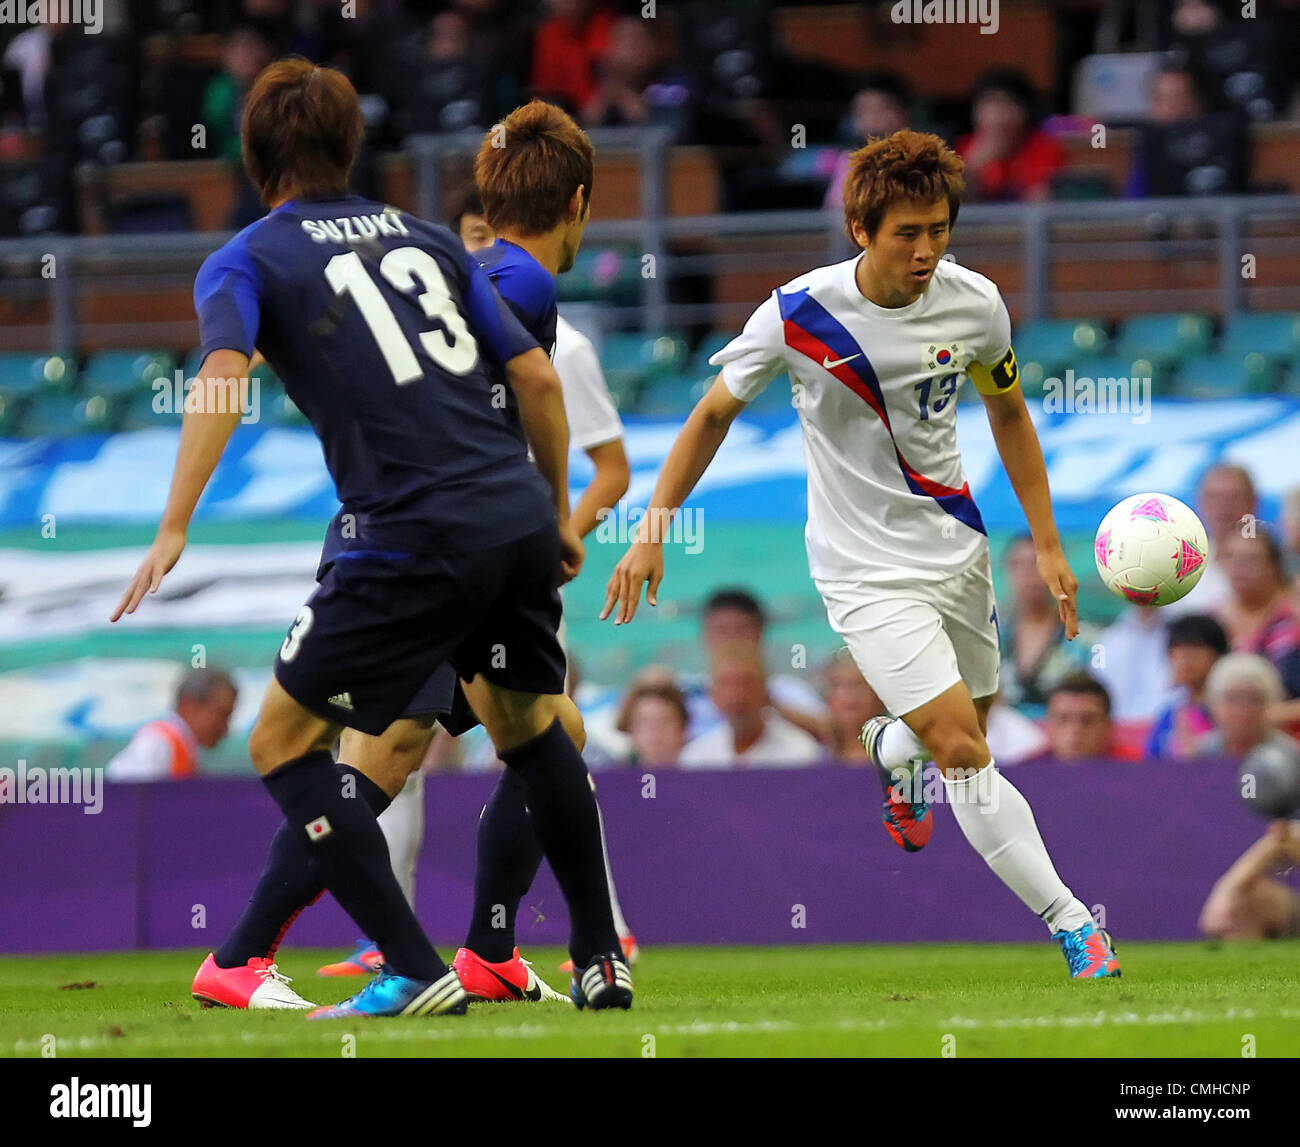 10th Aug 2012. 10.08.2012 Cardiff, Wales. South Korea Midfielder Koo Ja-Cheol (Augsburg)  in action during the Olympic Football Men's Bronze Medal Match between Japan and Republic of Korea. South Korea win the London 2012 Olympic Games Bronze Medal by beating Japan 2-0. Stock Photo